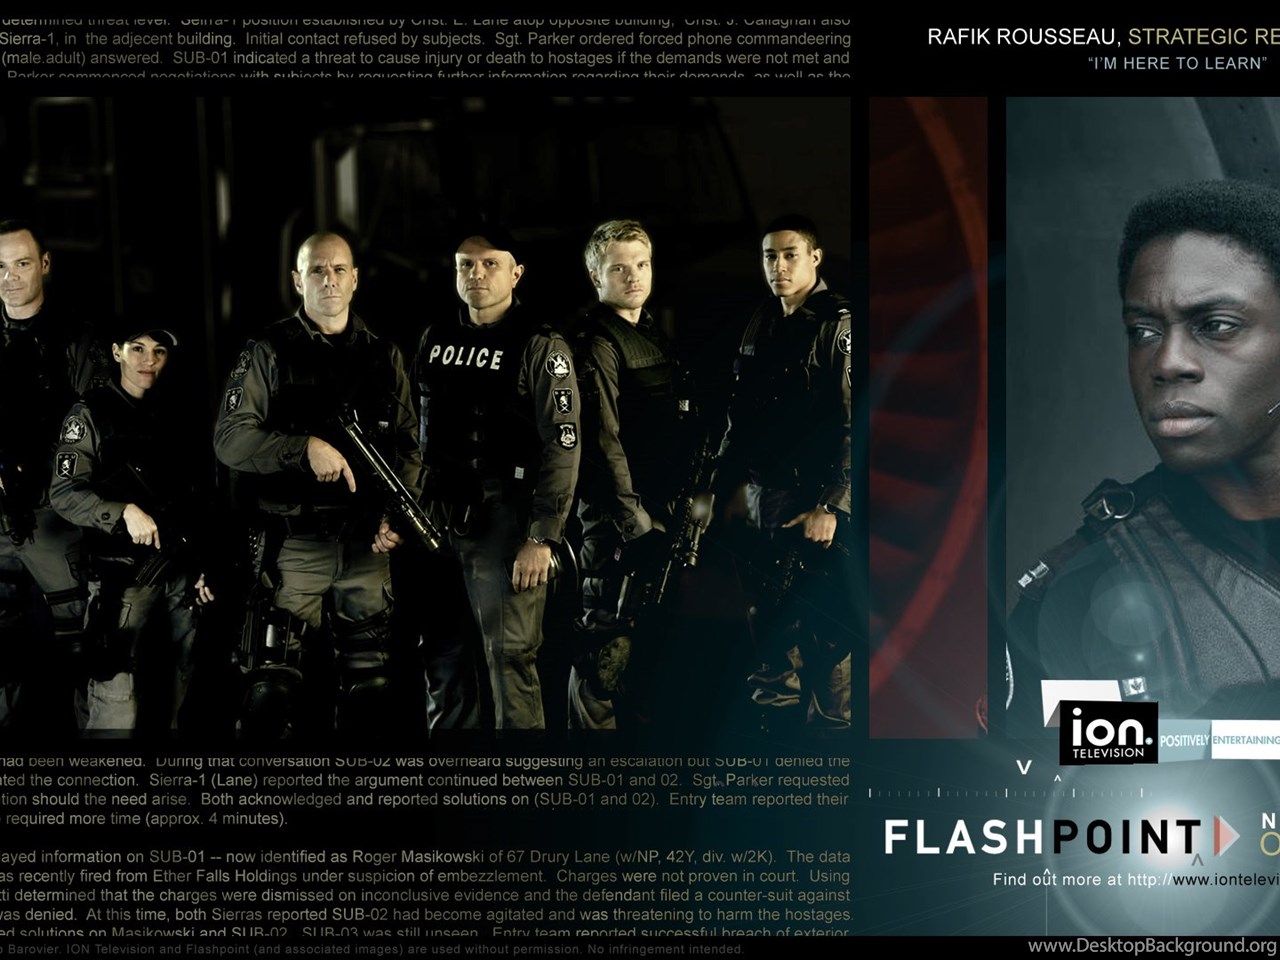 Order forces. Flashpoint Спайк. Flashpoint x 1998. Anti-Fall.